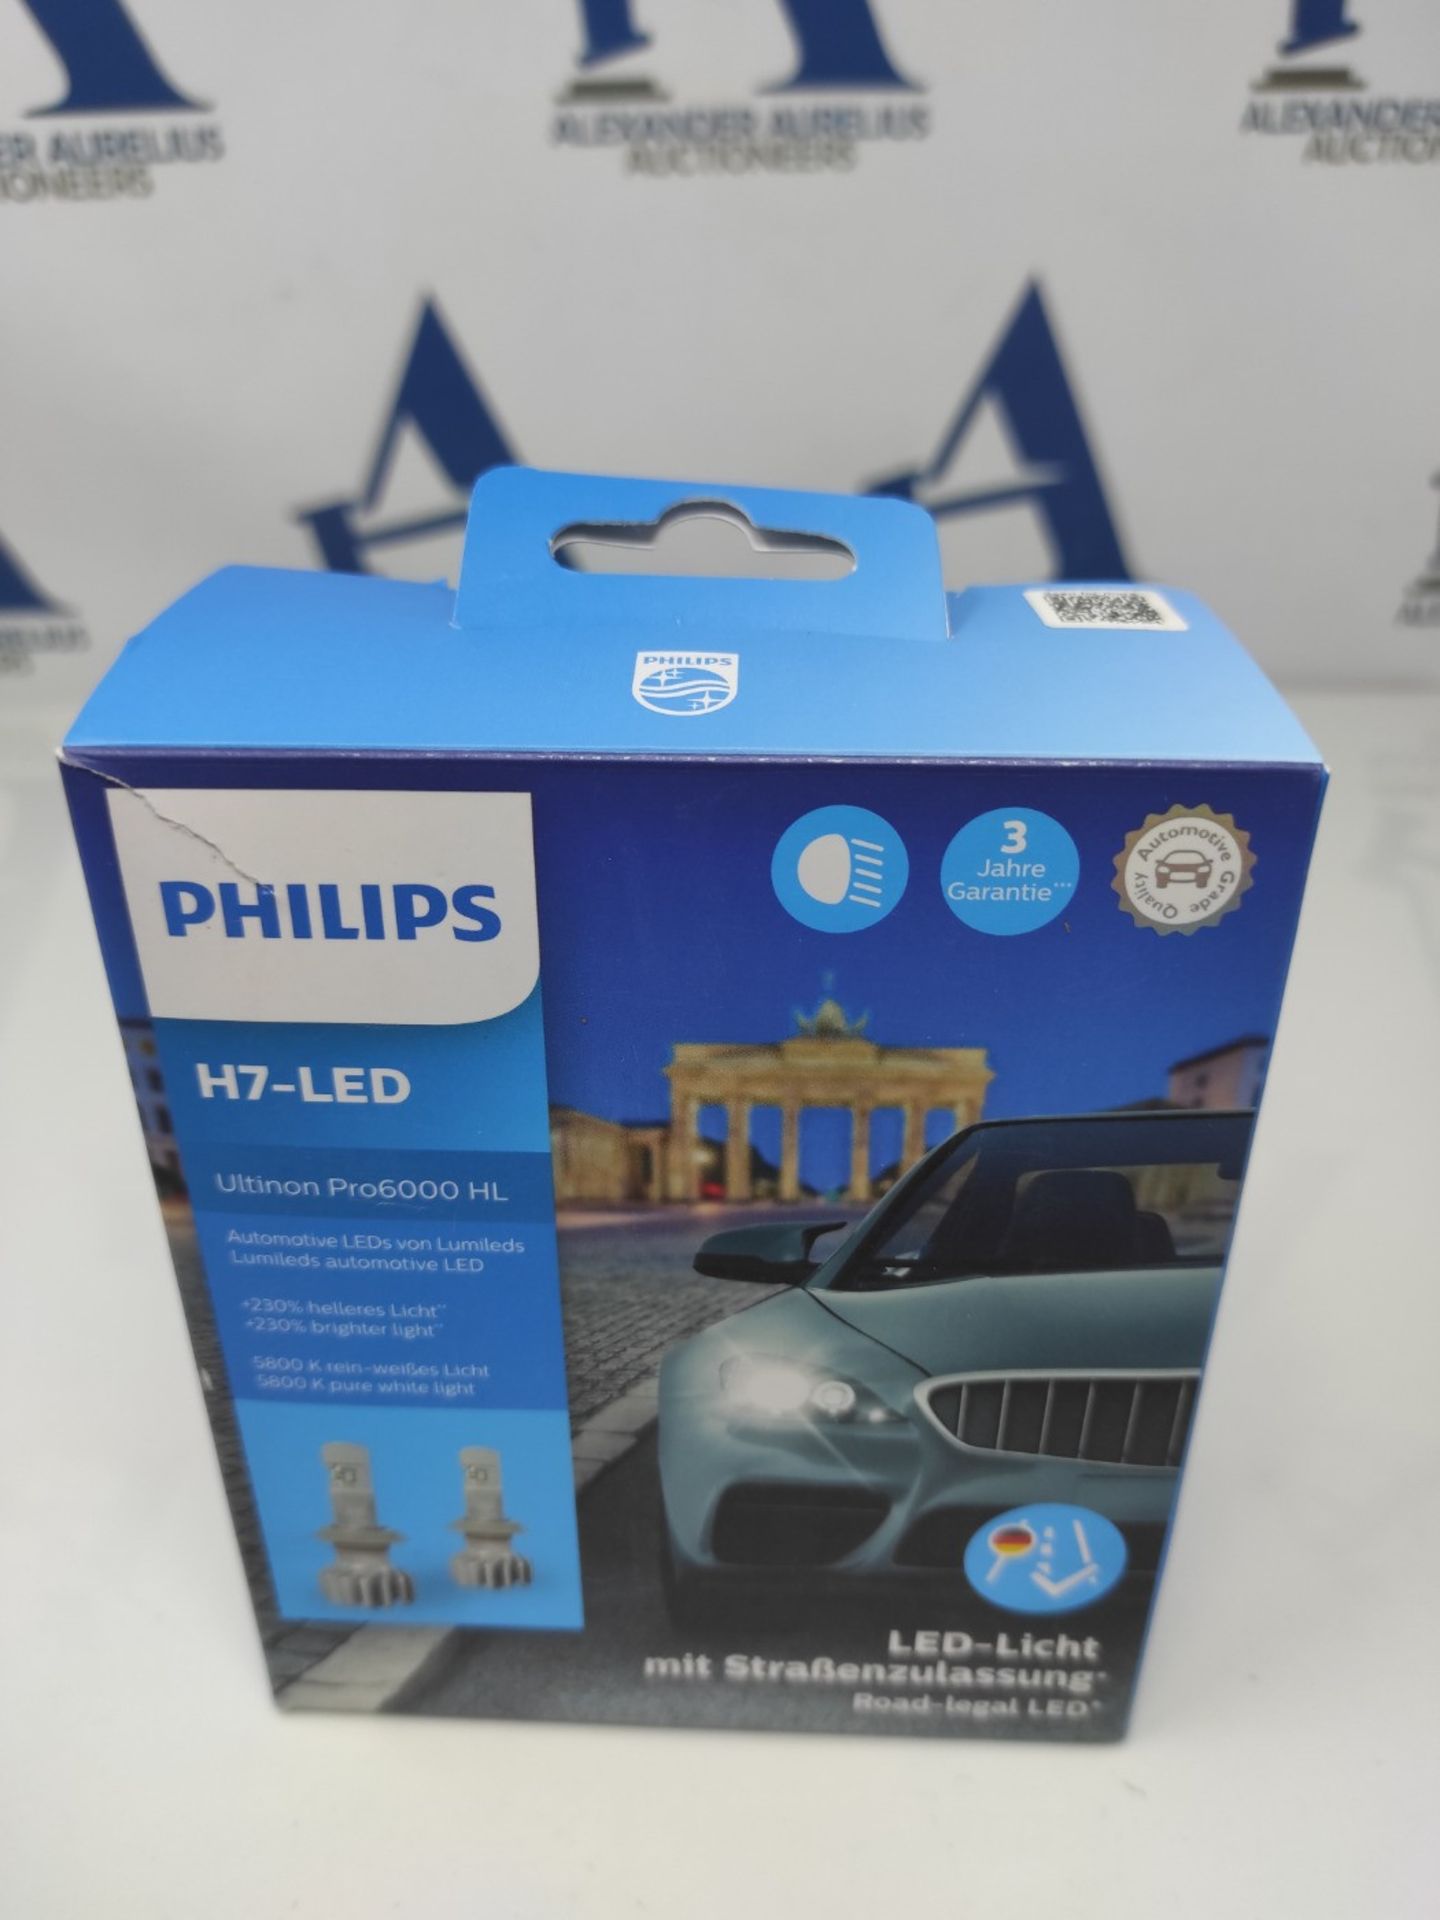 RRP £92.00 Philips Ultinon Pro6000 H7-LED headlamp bulb with road approval, 230% brighter light - Image 2 of 3